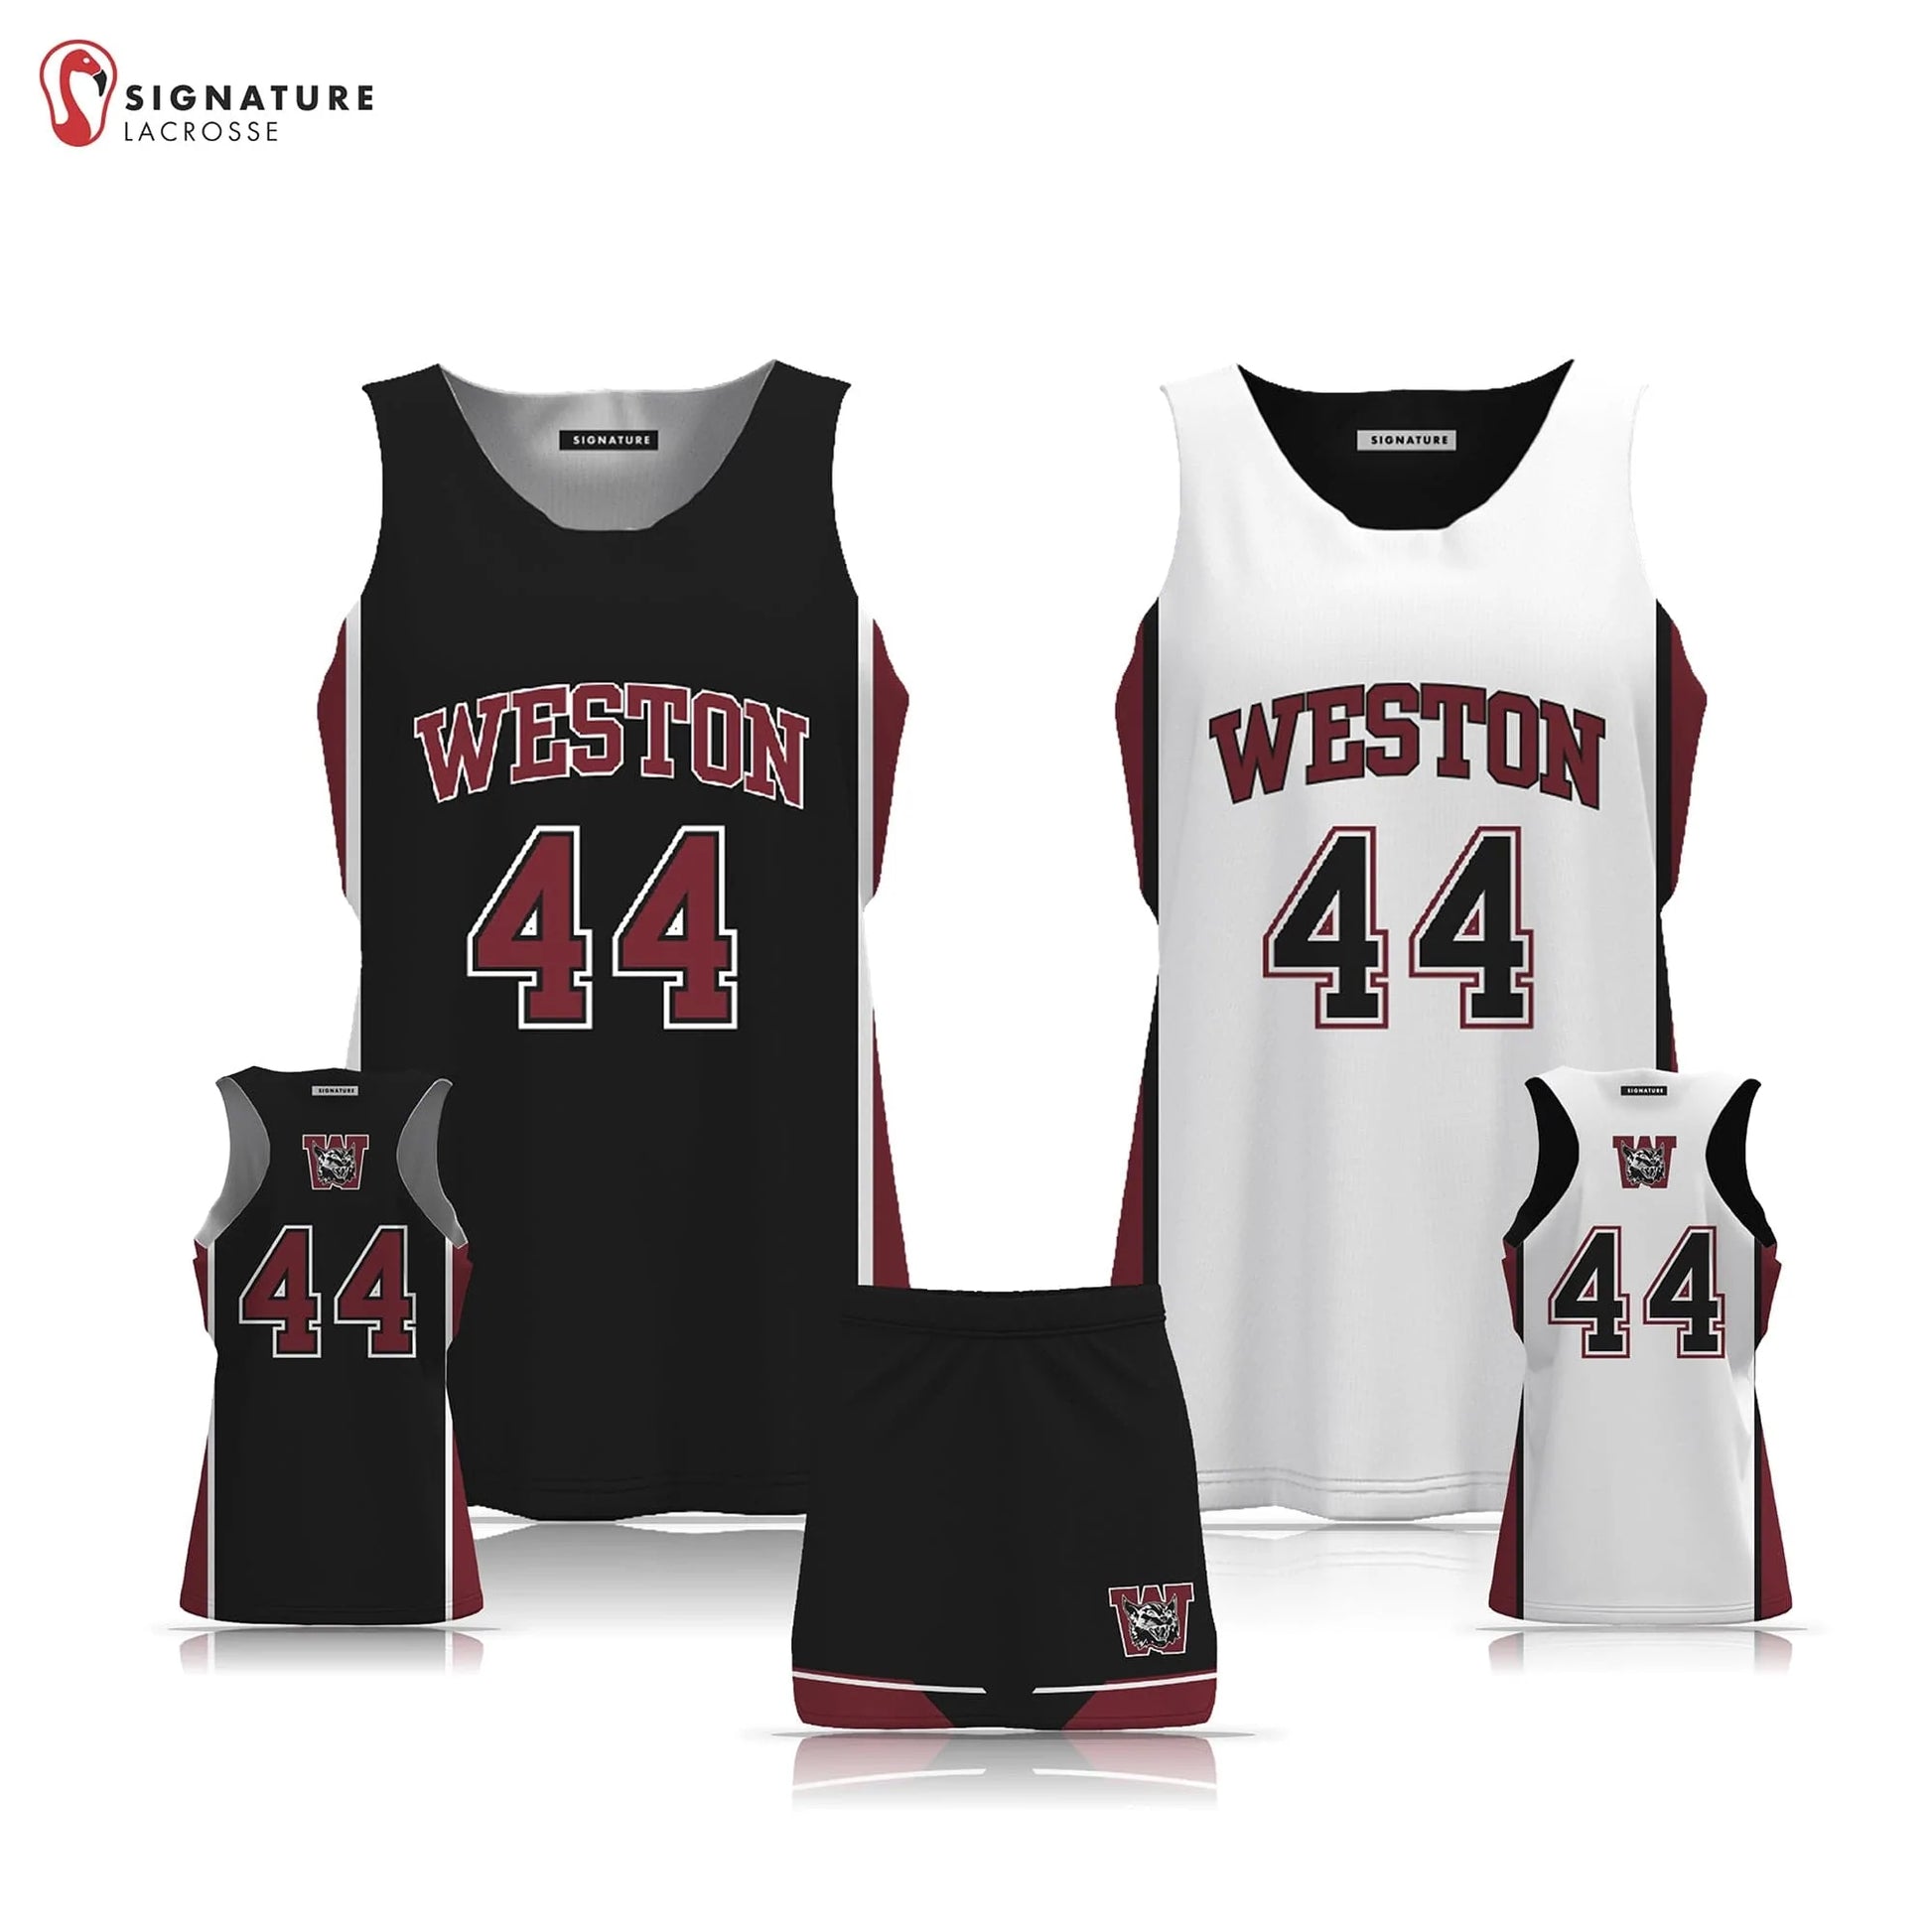 Weston Youth Lacrosse Women's 2 Piece Player Game Package Signature Lacrosse